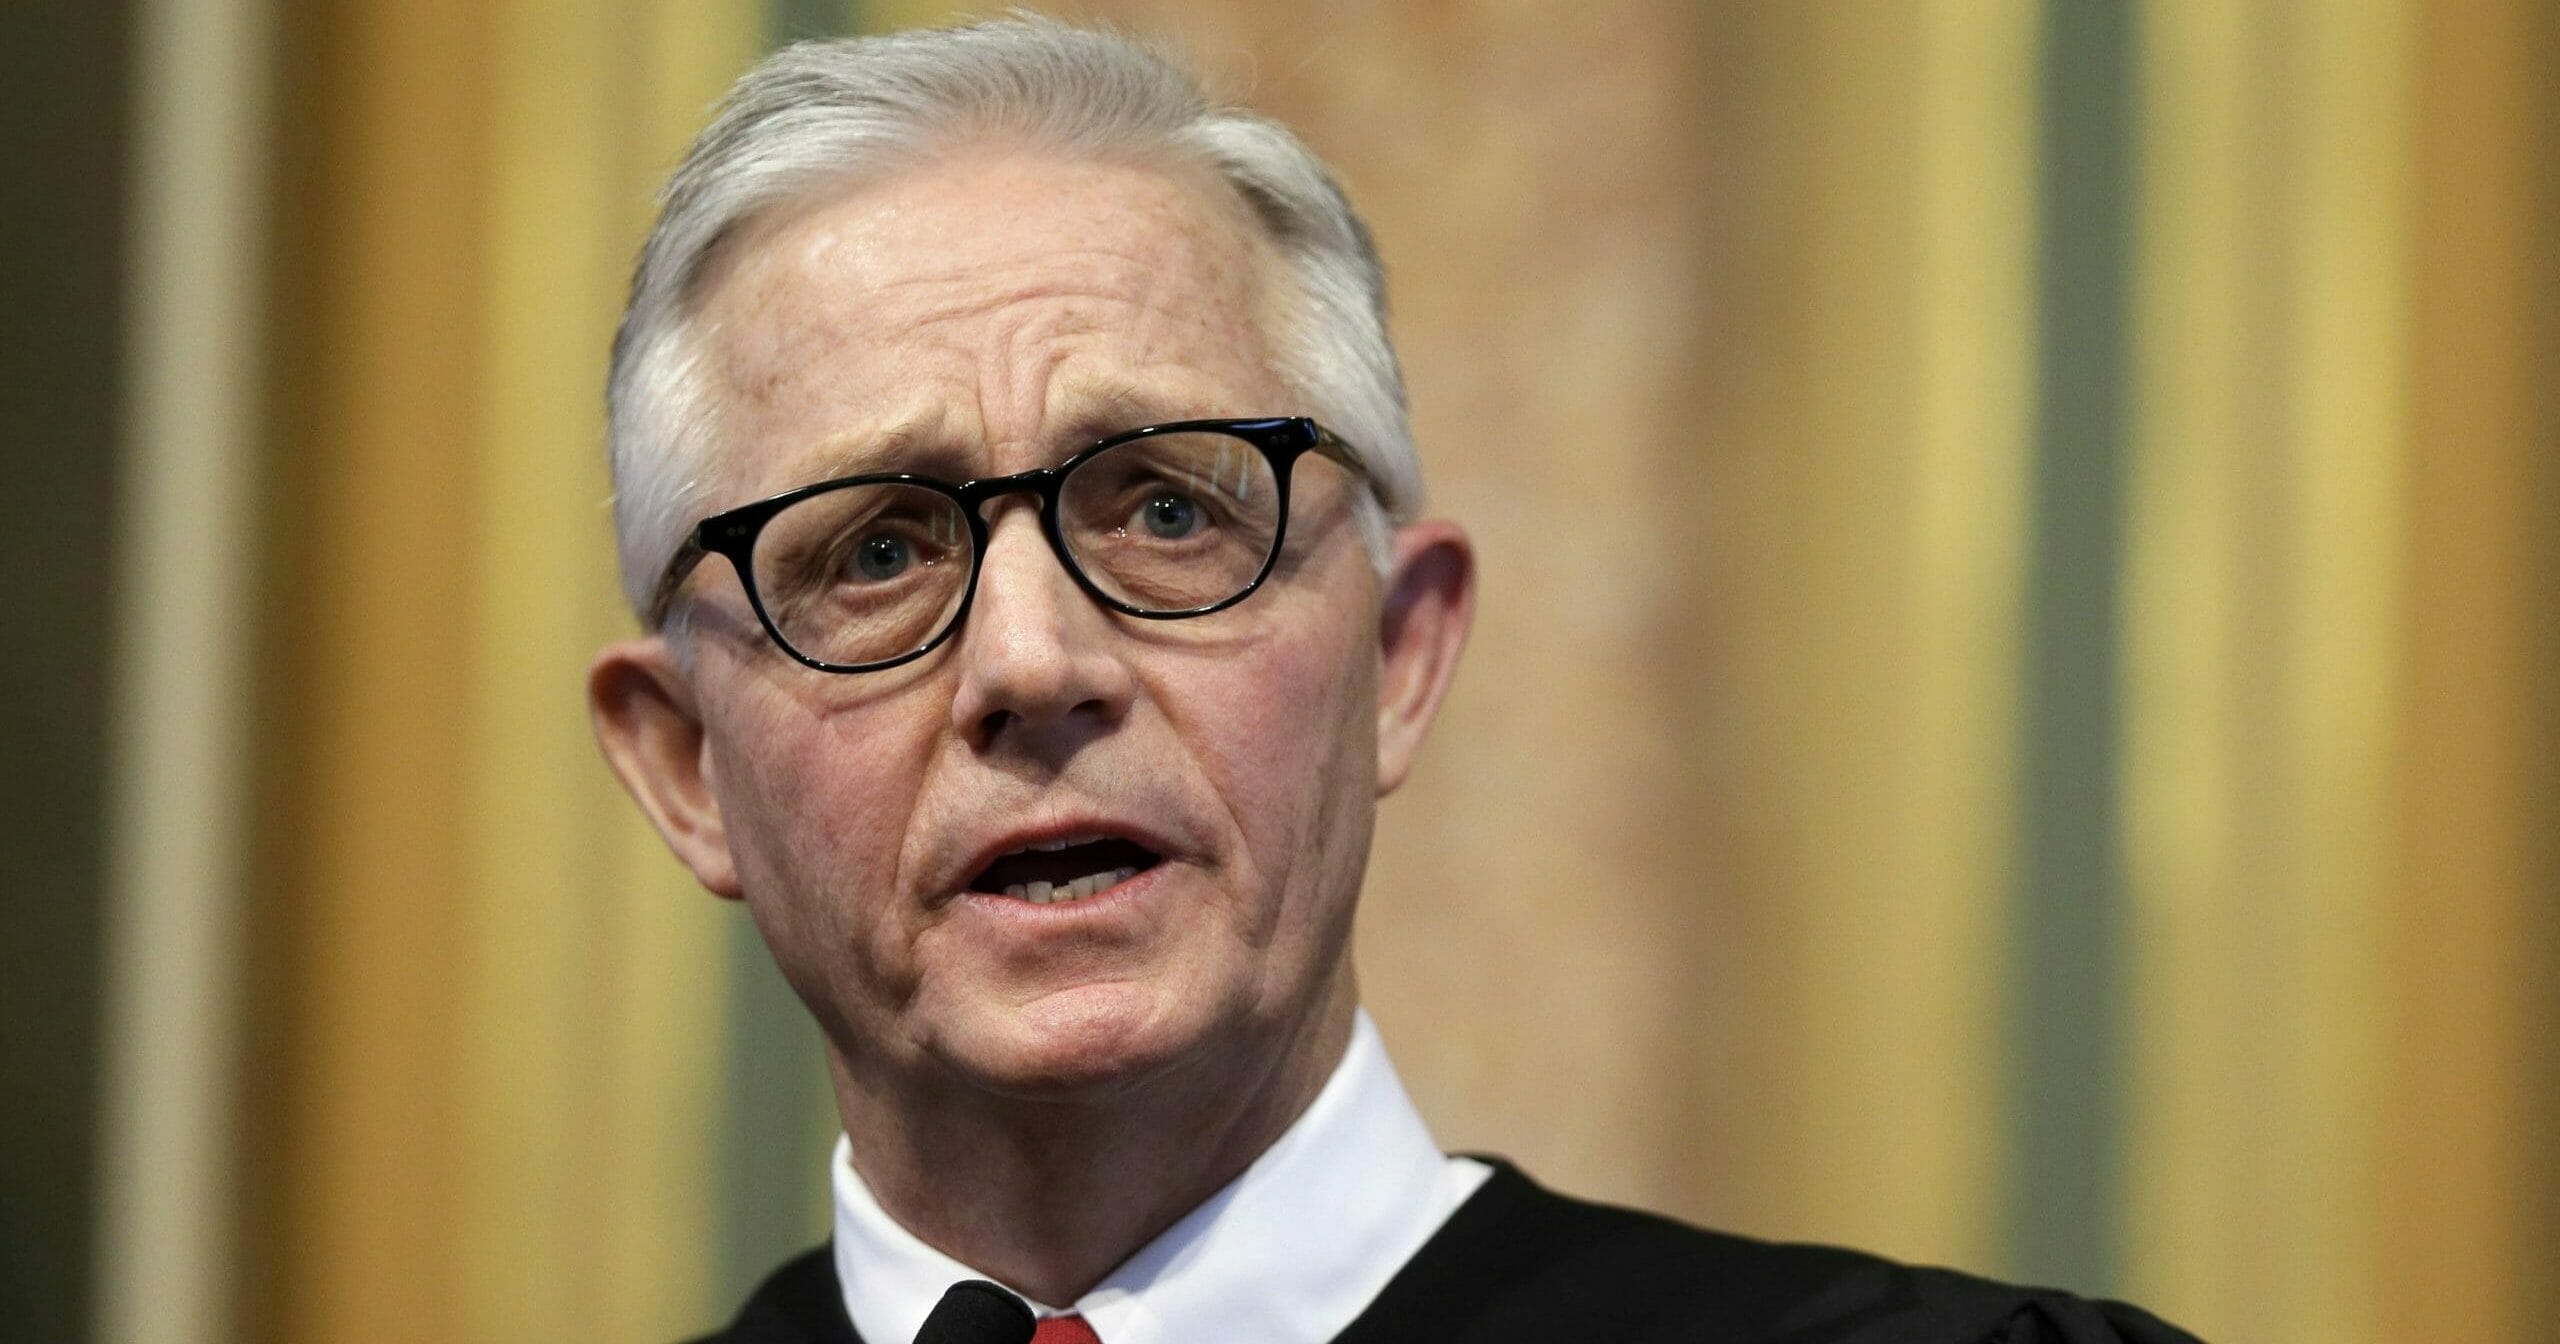 In this Jan. 13, 2016 file photo, Iowa Supreme Court Chief Justice Mark Cady delivers his Condition of the Judiciary address to a joint session of the Iowa Legislature in Des Moines, Iowa. Cady’s family says in a statement posted on the court’s website that he died unexpectedly of a heart attack on Nov. 15, 2019. He was 66.